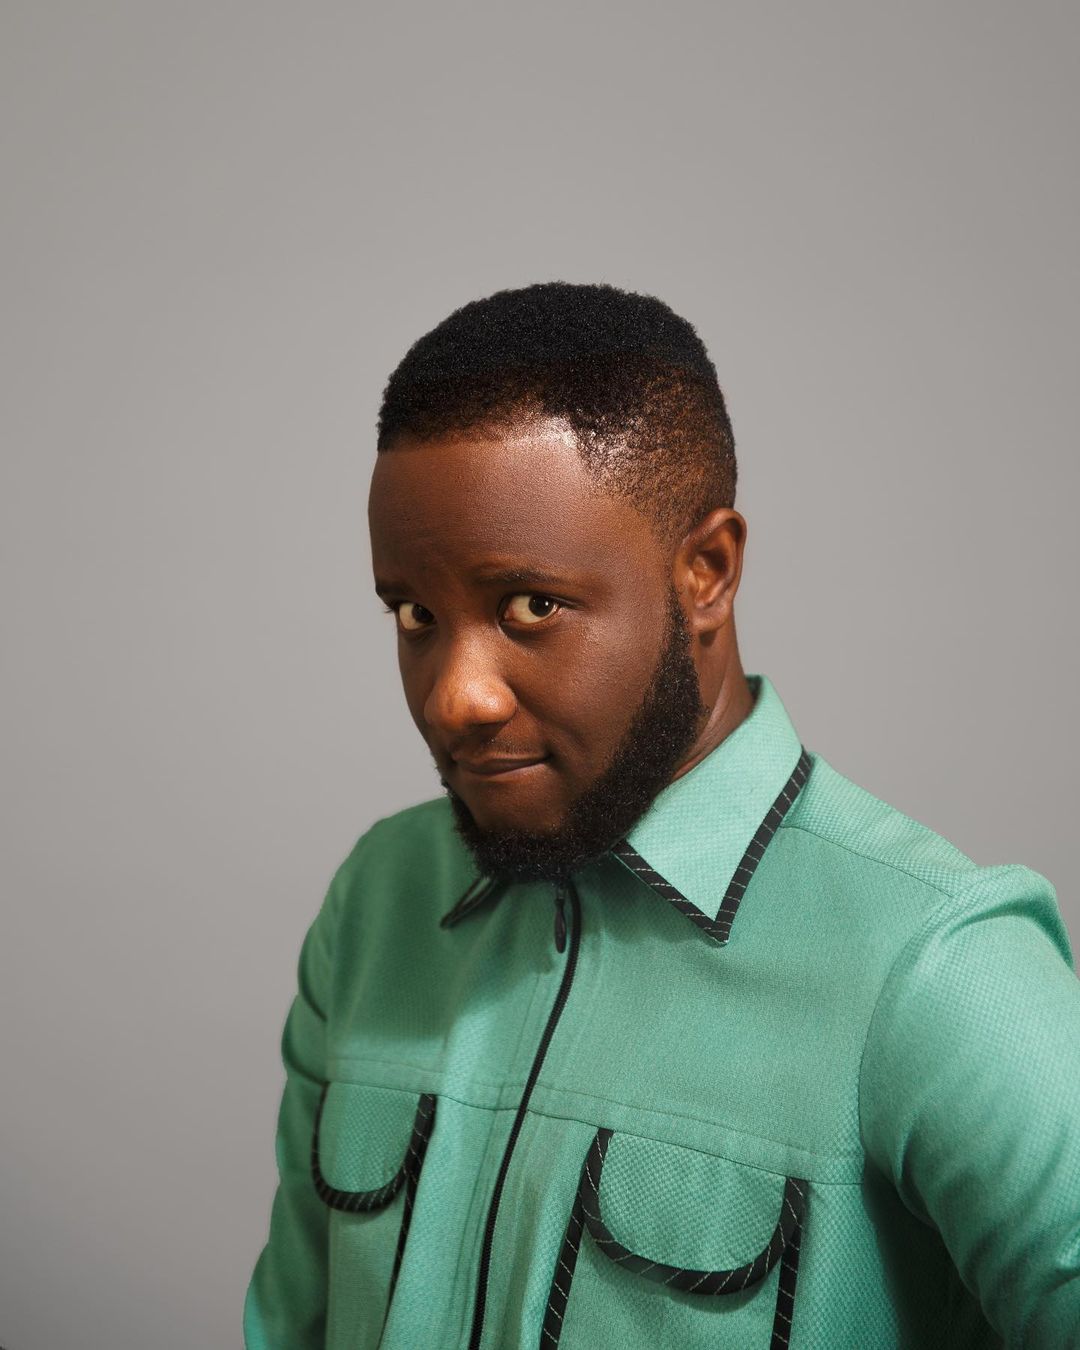 "You don't have fans or money anymore, don't waste your time doing music" – Deeone slams Whitemoney